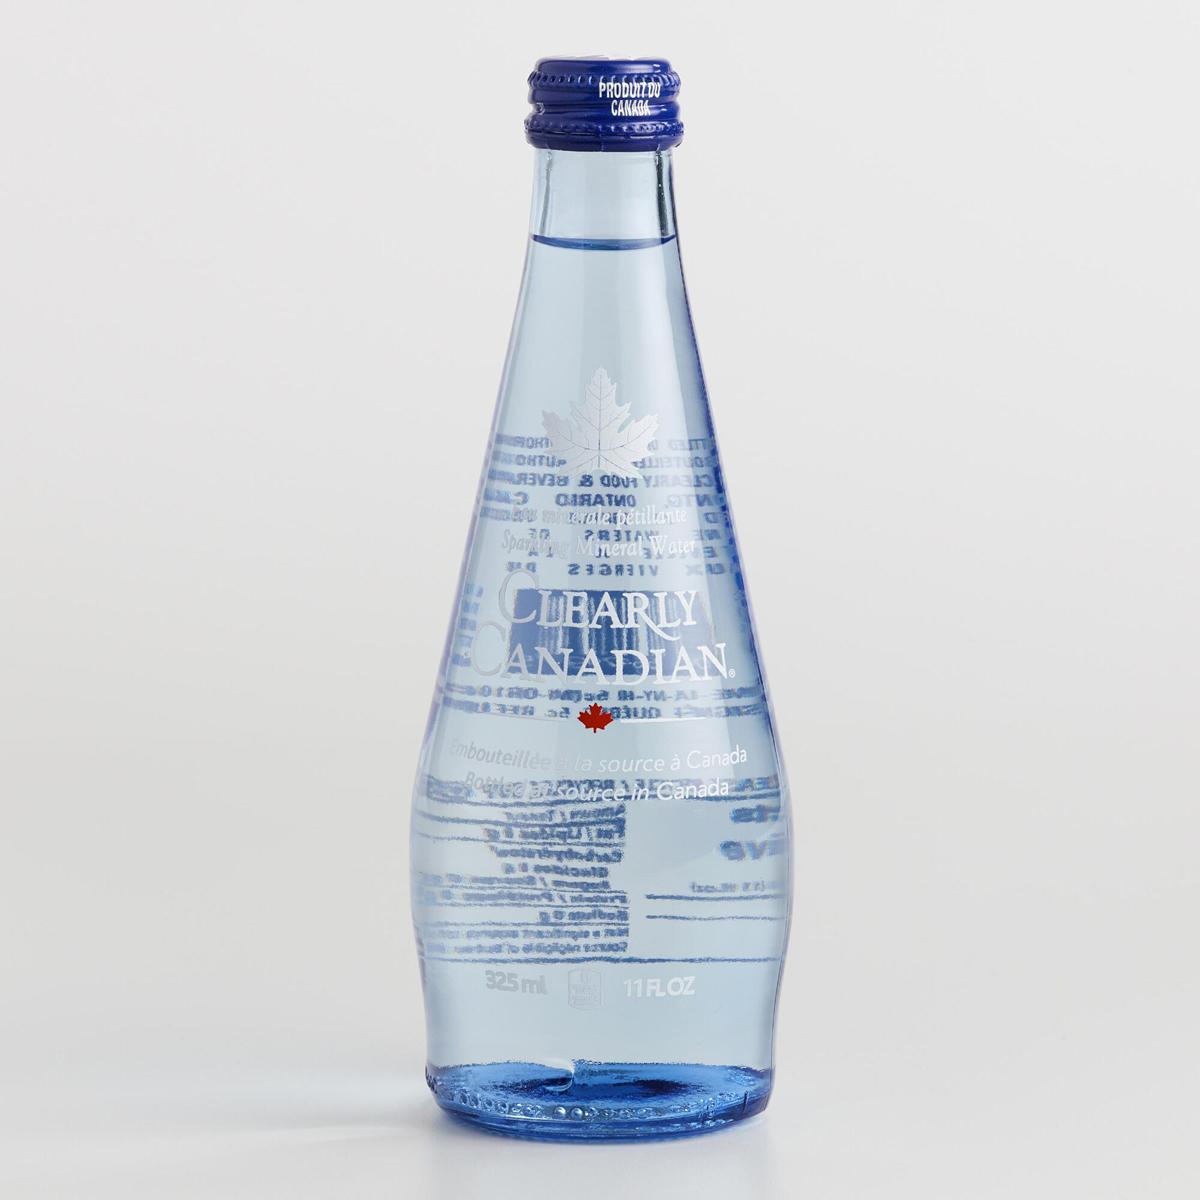 12 Clearly Canadian Sparkling Mineral Water for $3.56